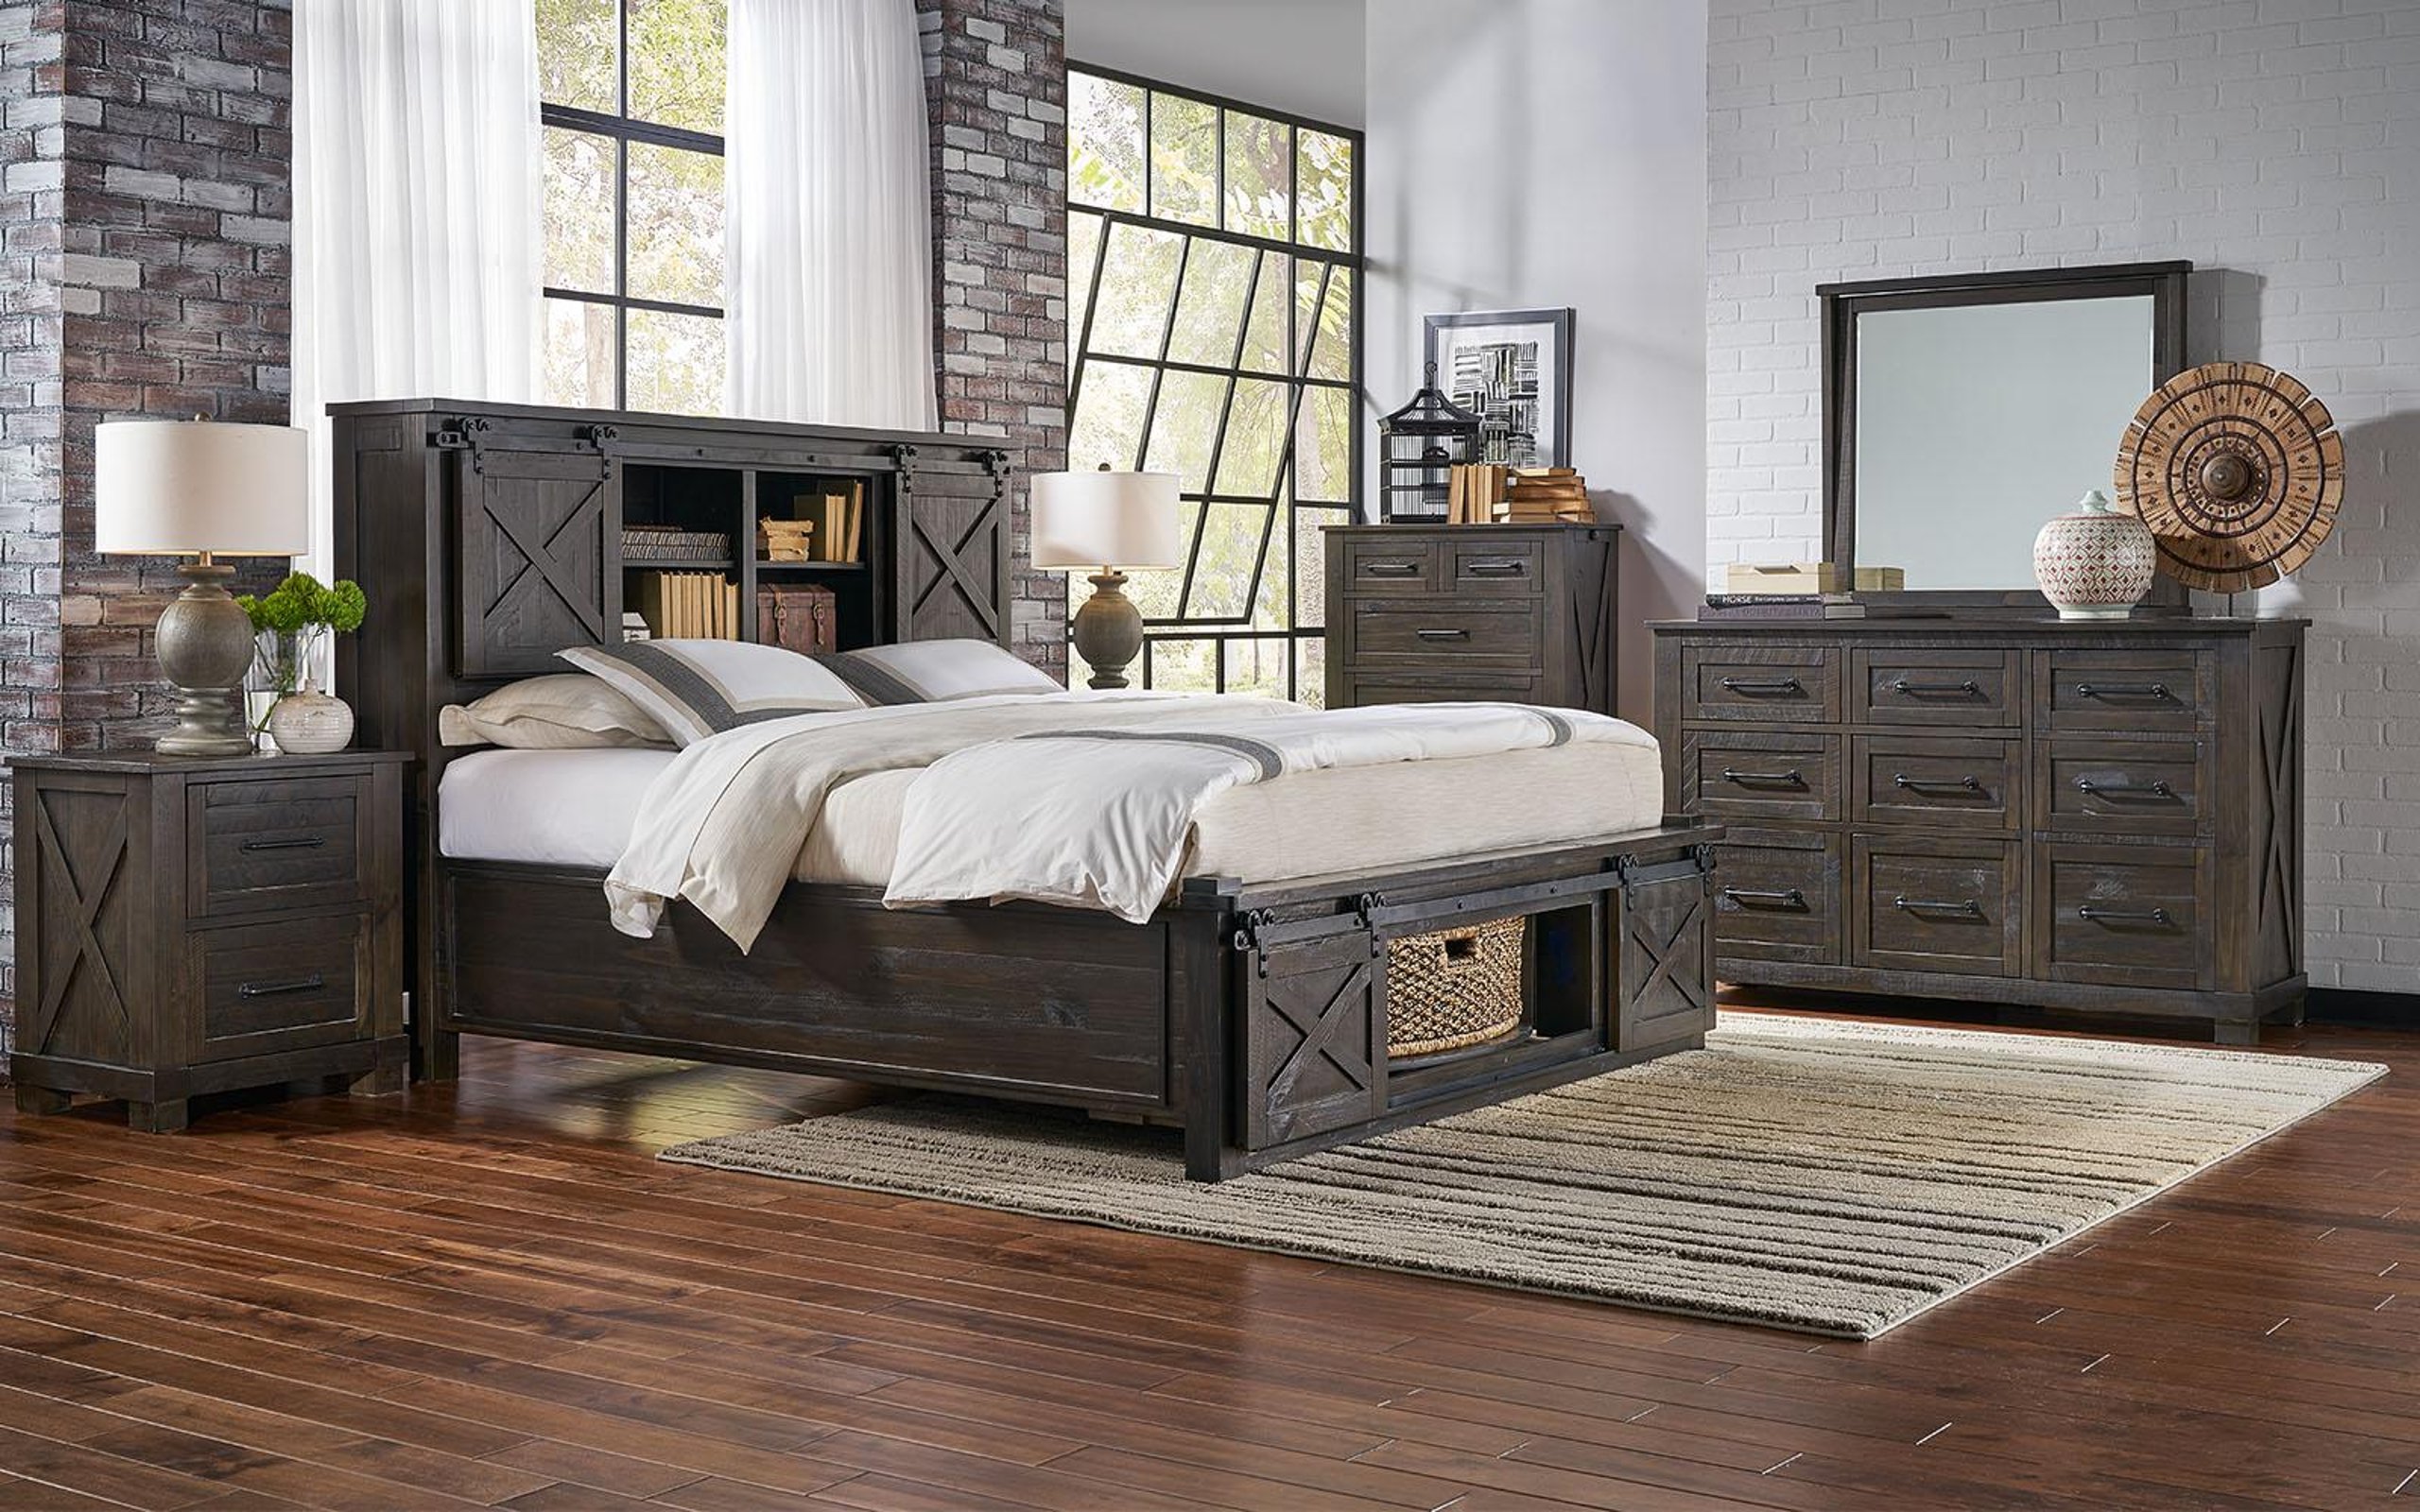 Rustic Queen Rotating Storage Bedroom Set 5pcs Suvcl5032 A America Sun Valley Buy Online On Ny 